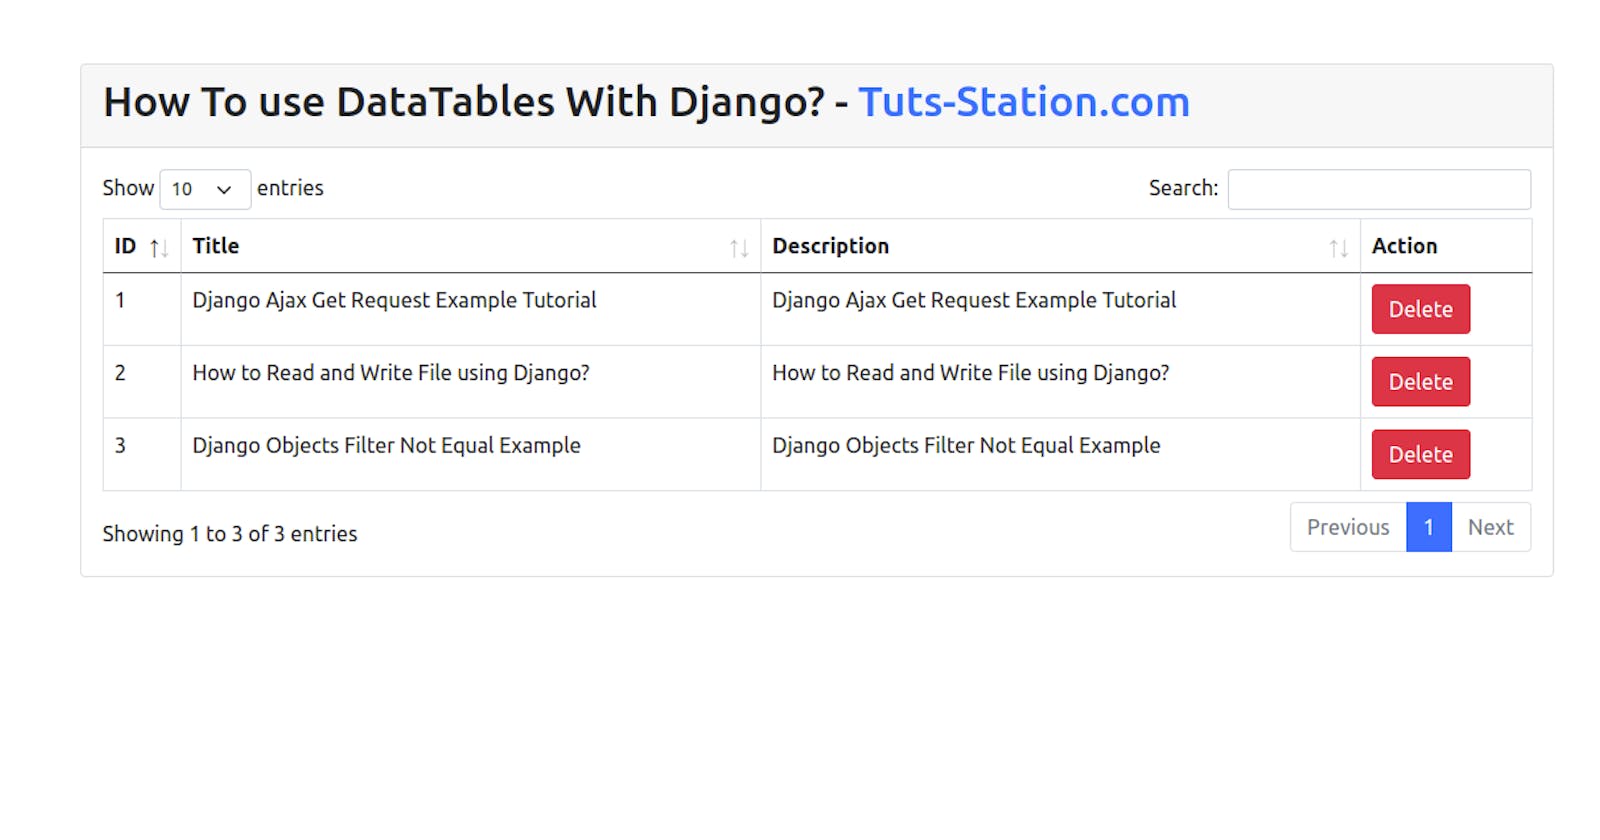 How to use Datatables in Django?